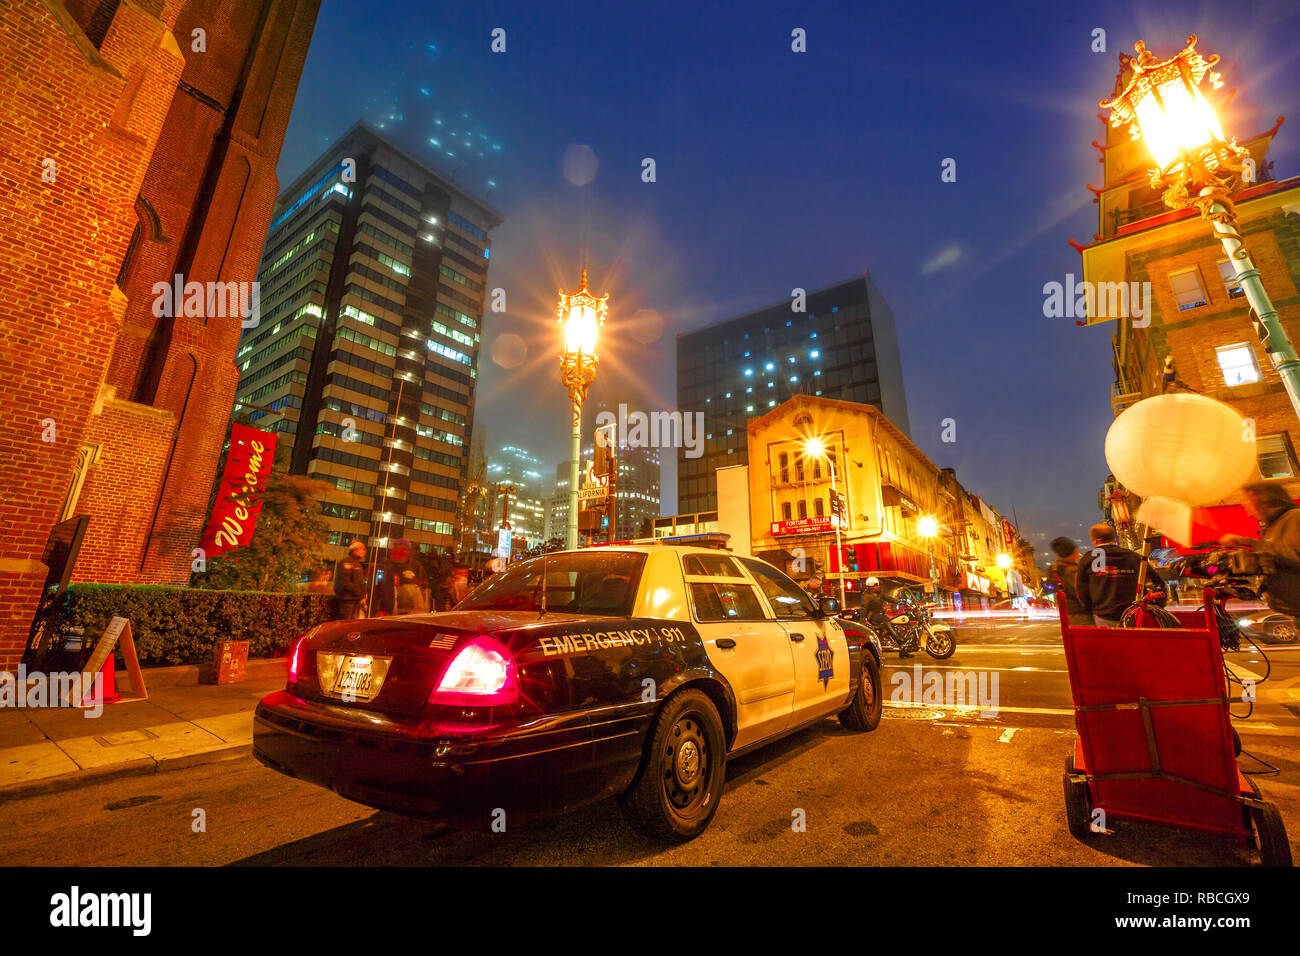 San Francisco, California, United States - August 16, 2016: film crew shooting a fake police car in Chinatown of San Francisco by night. Urban street view. Stock Photo